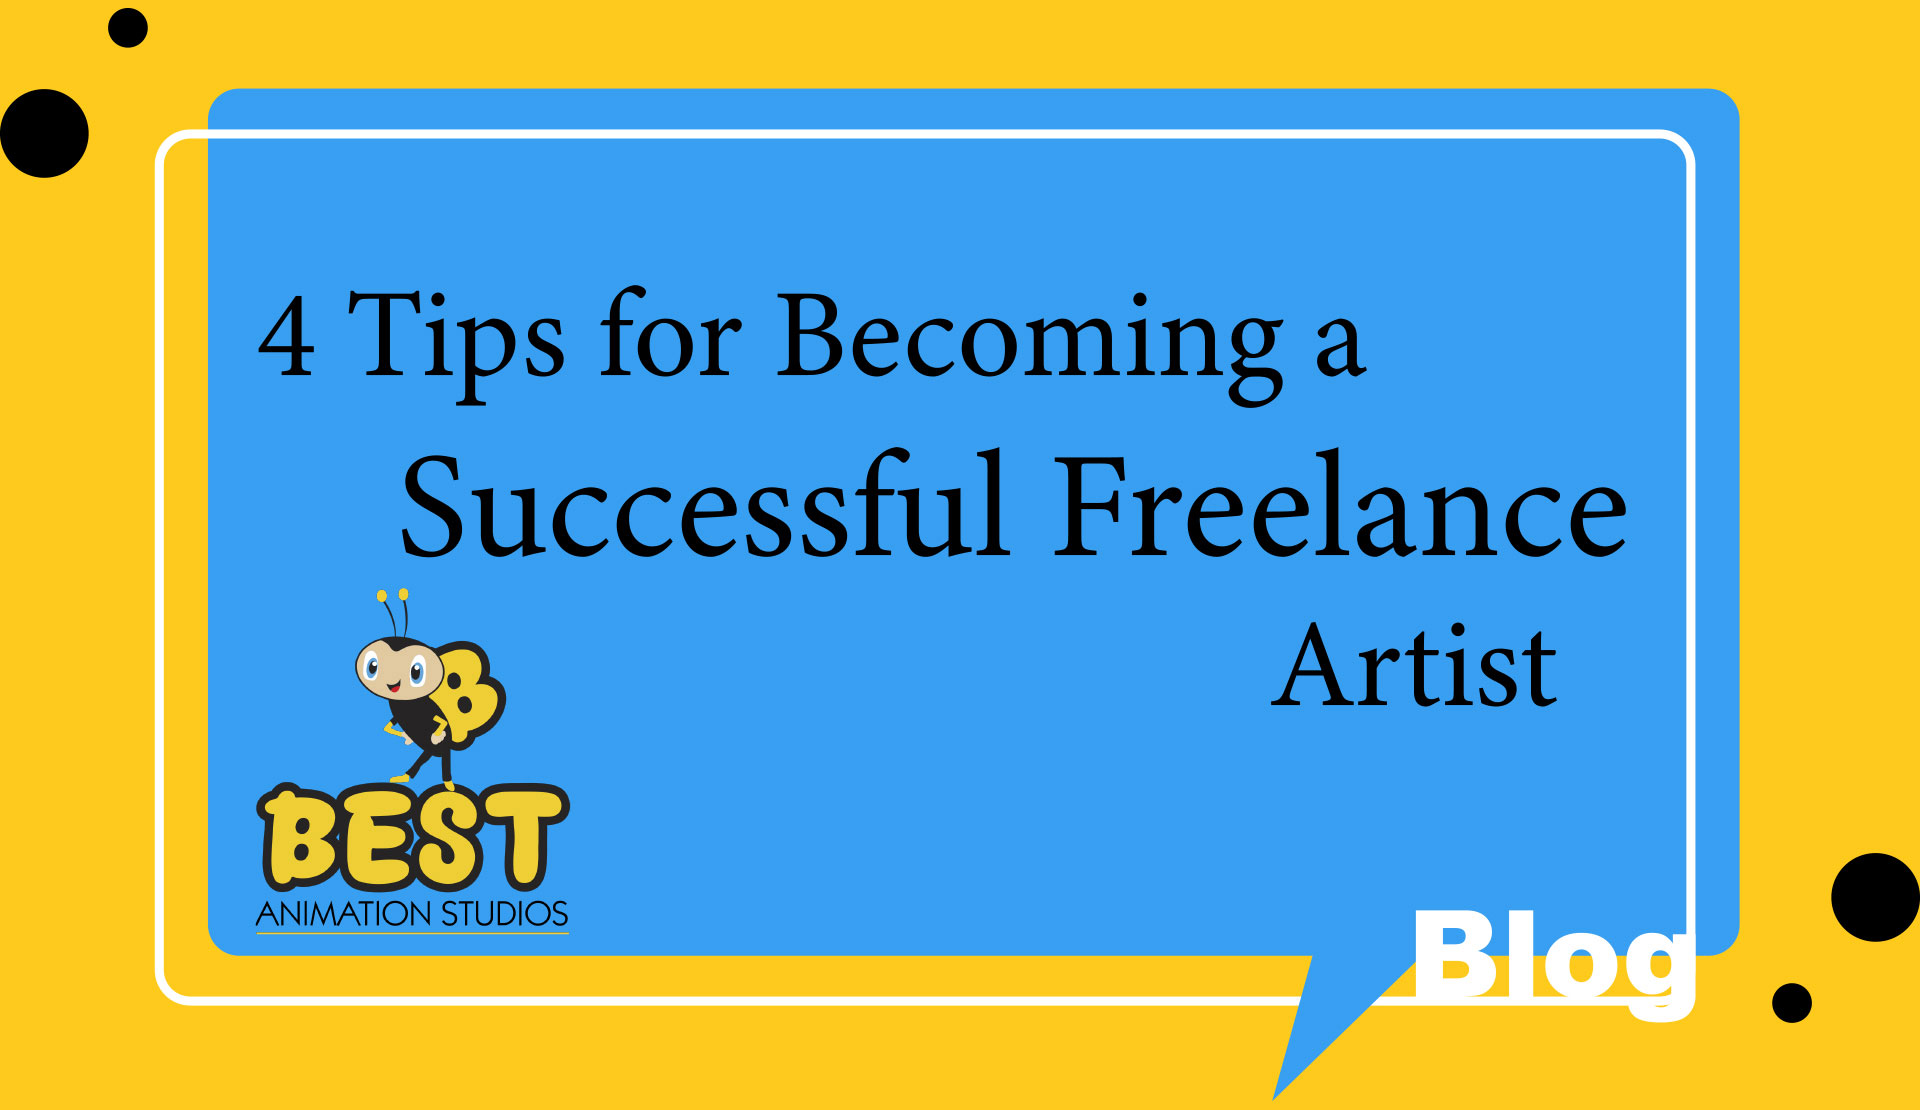 4 Tips for Becoming a Successful Freelance Artist